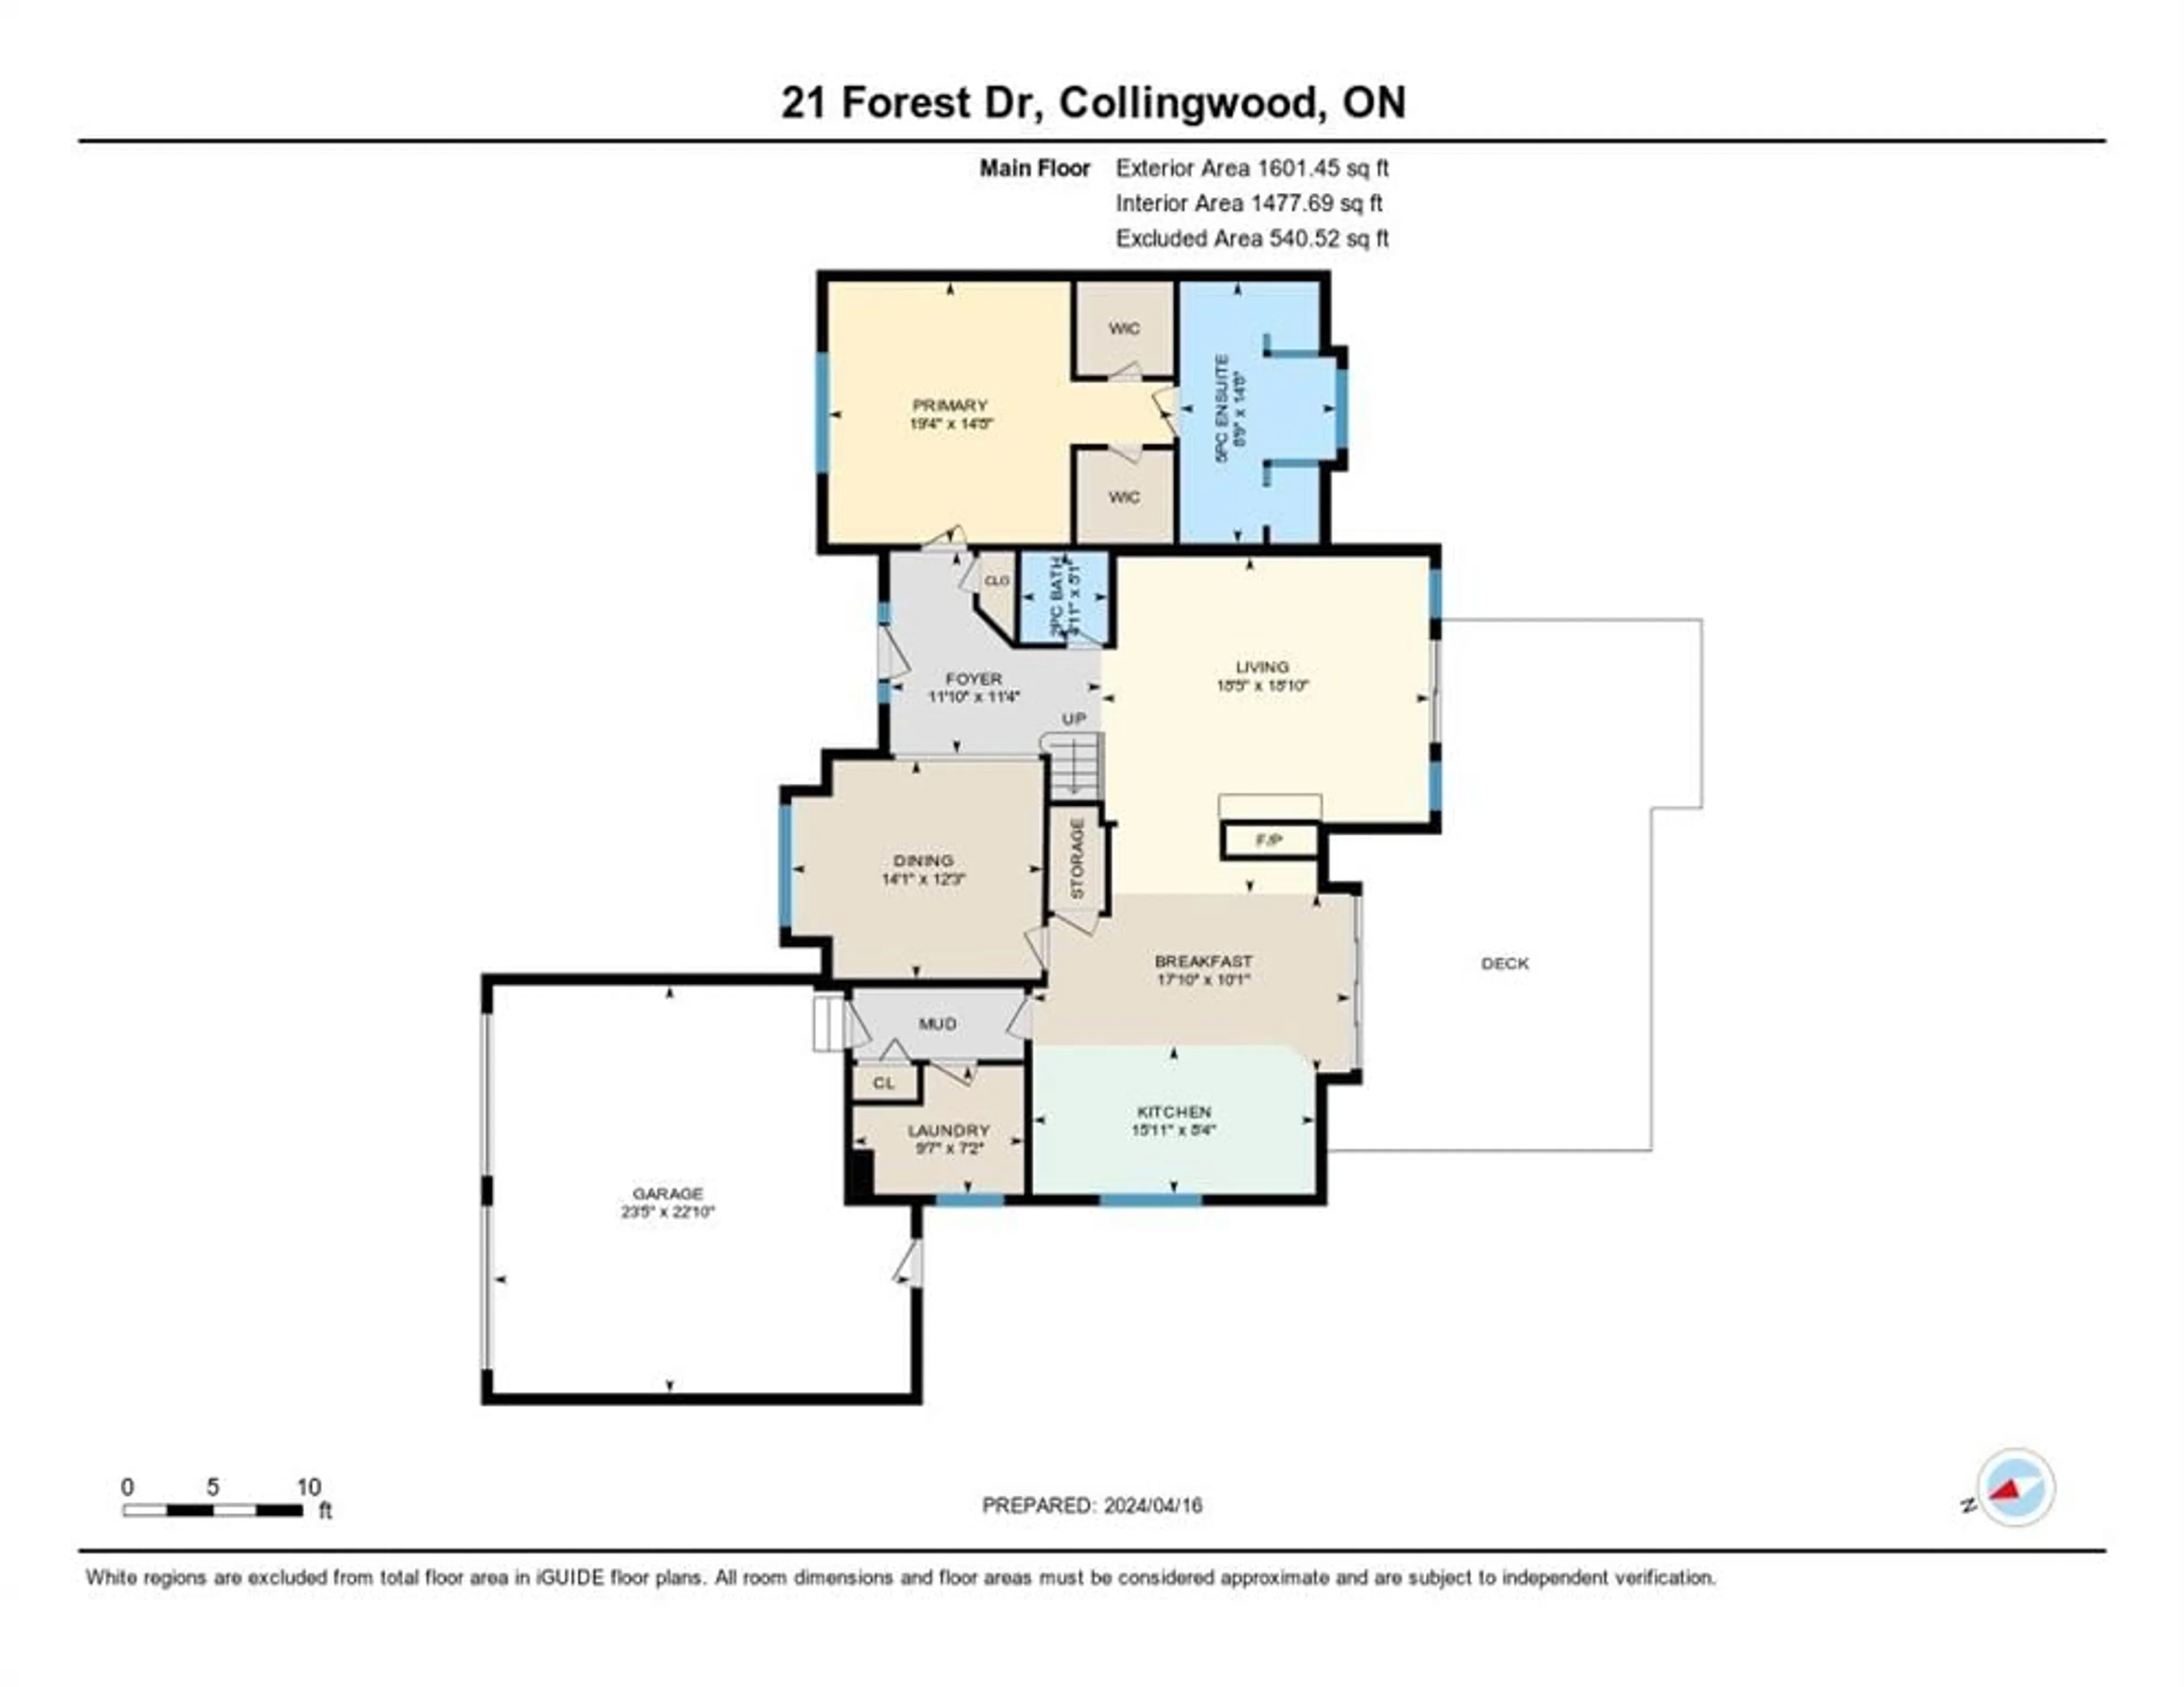 Floor plan for 21 Forest Dr, Collingwood Ontario N0H 2P0